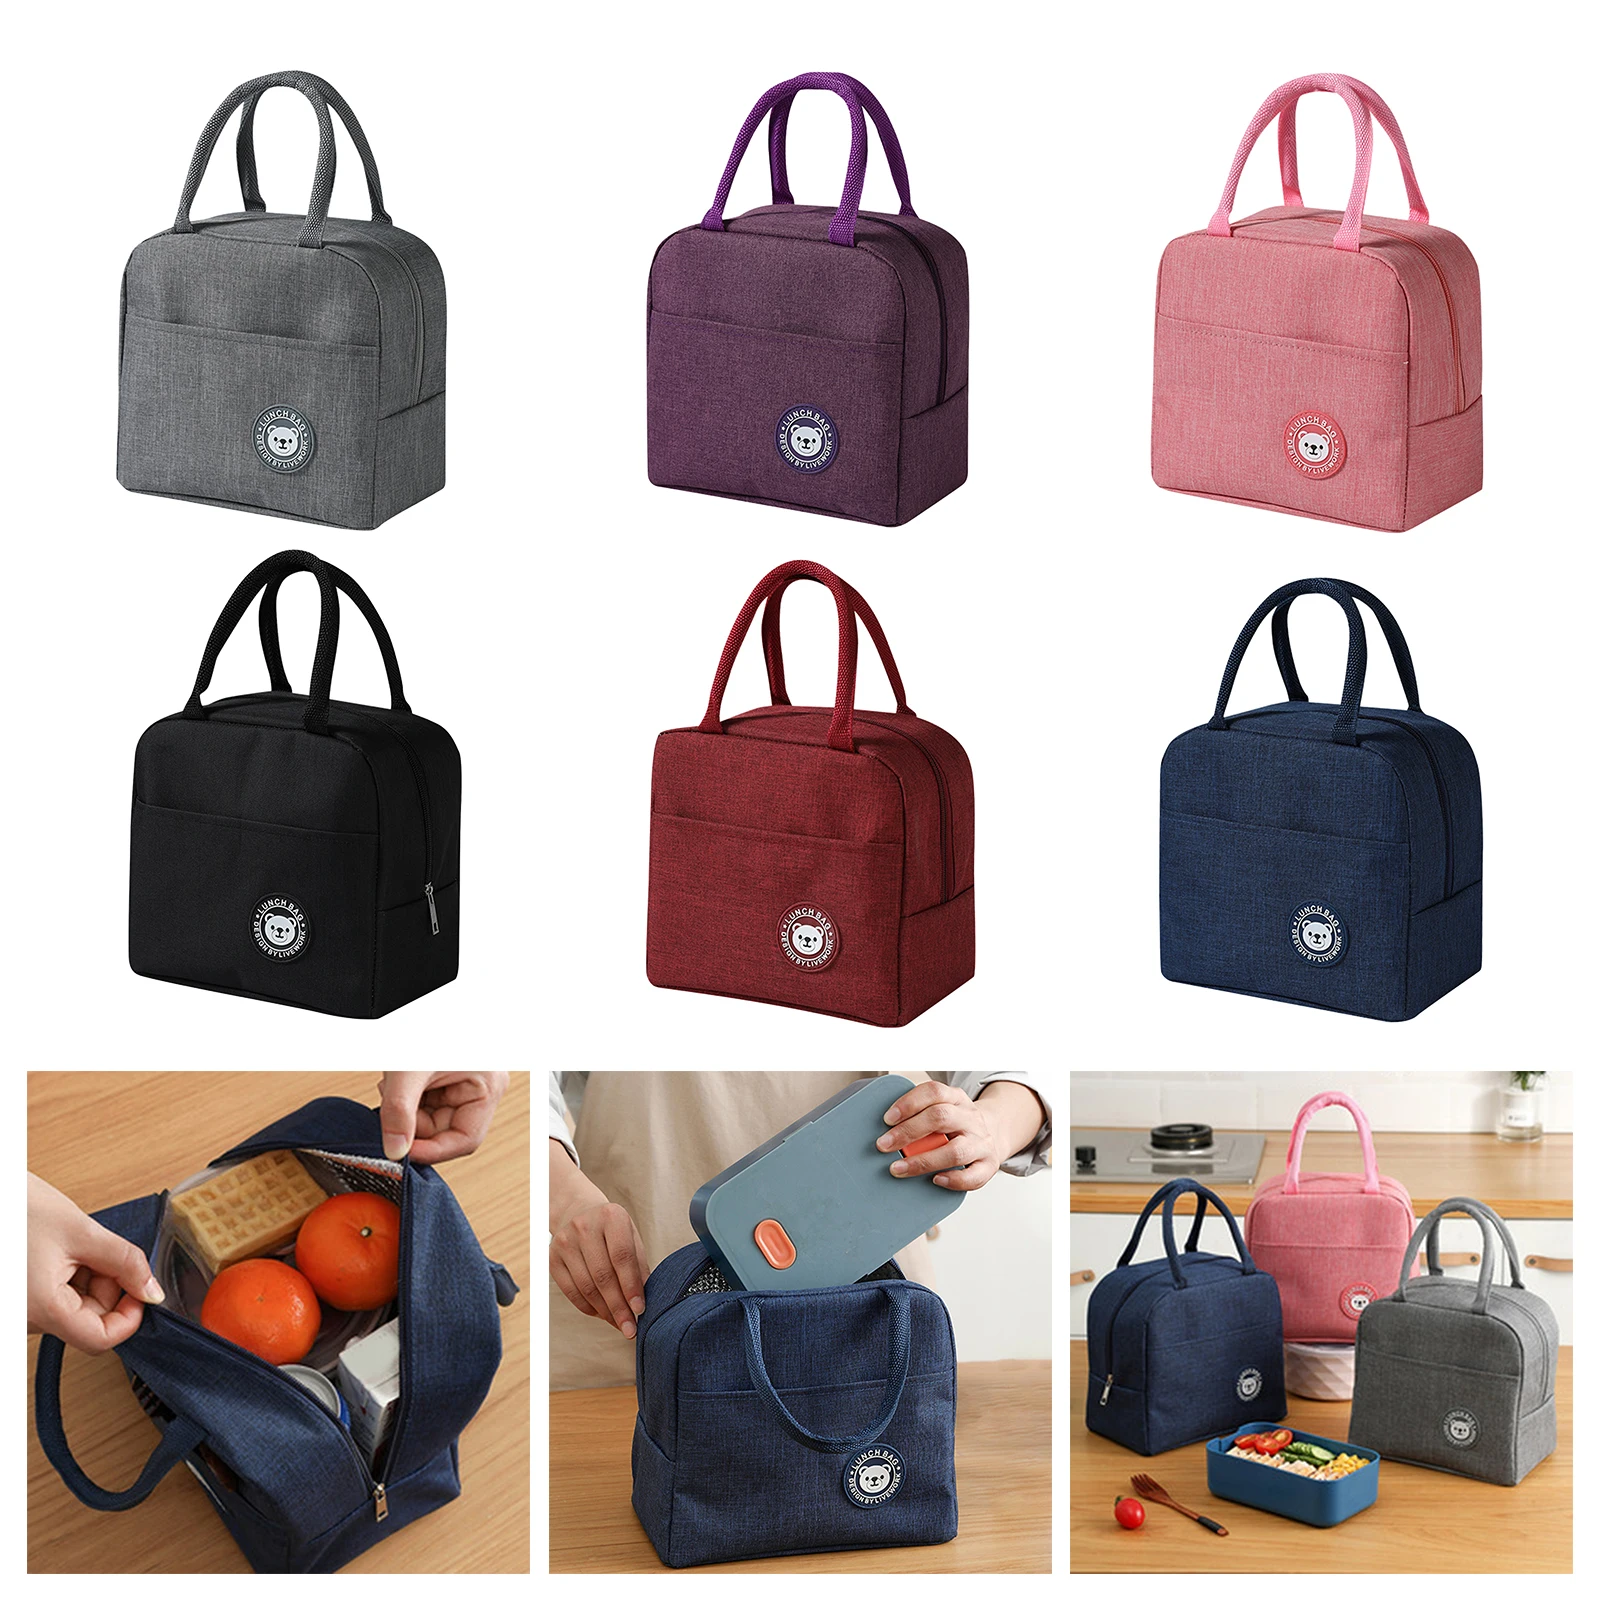 https://ae01.alicdn.com/kf/H0f10dd8b2b1d464b9d62b856084ede5eP/Lunch-Bag-Insulated-Lunch-Bag-Reusable-Tote-Bag-Lunch-Box-for-Women-Men-Thermal-Cooler-Cooling.jpg